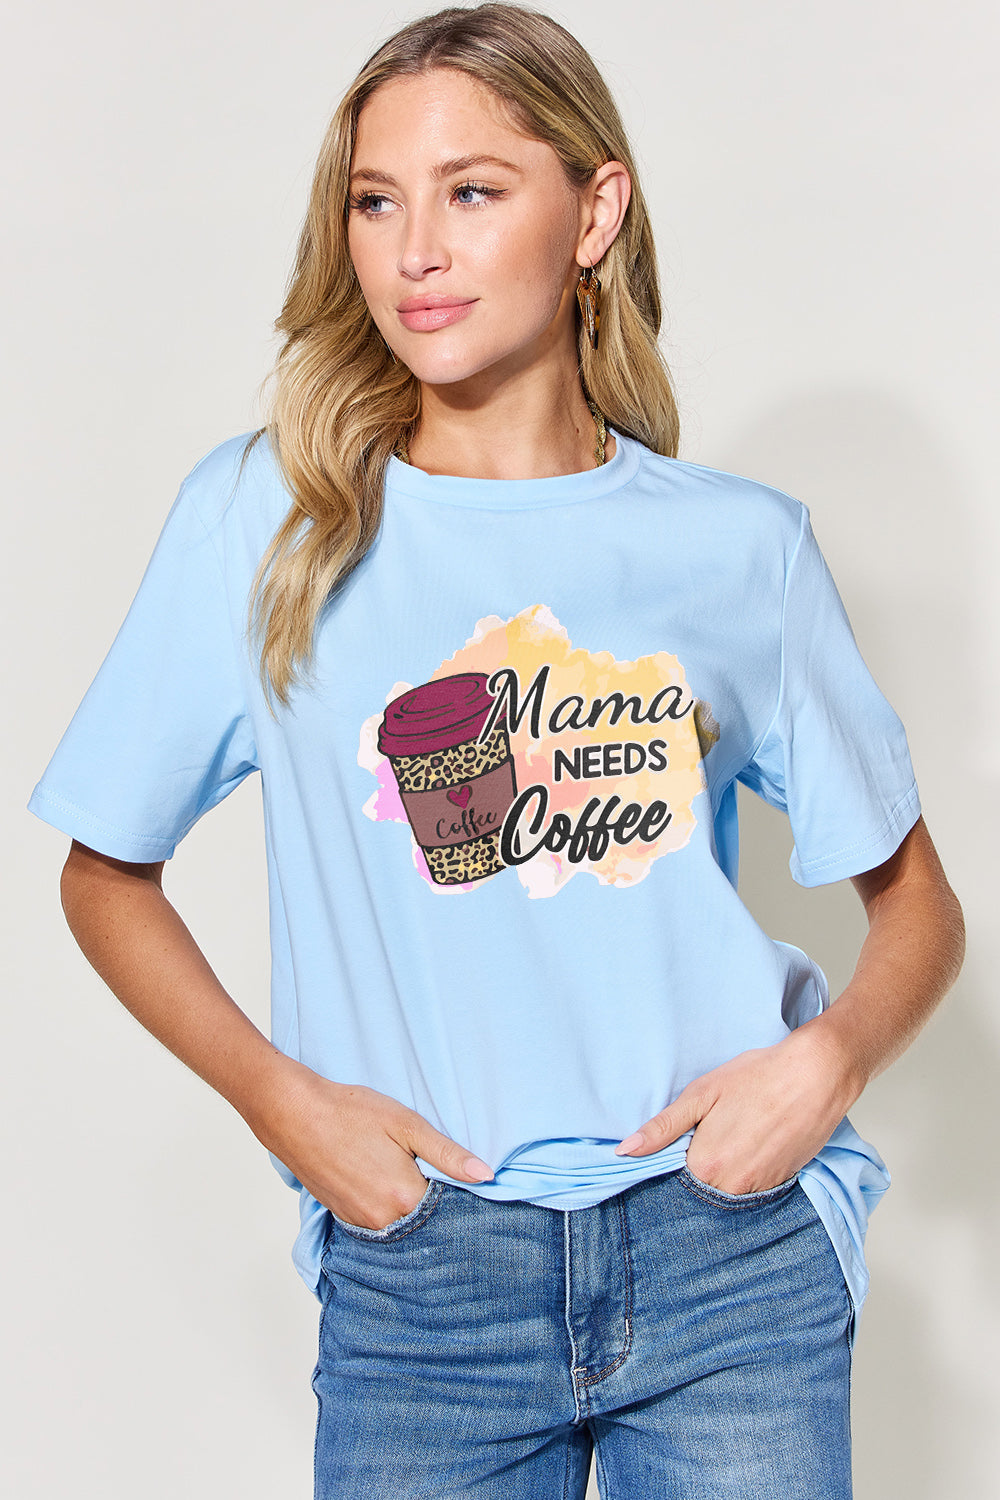 Simply Love Colorful Graphic Short Sleeve T-Shirt